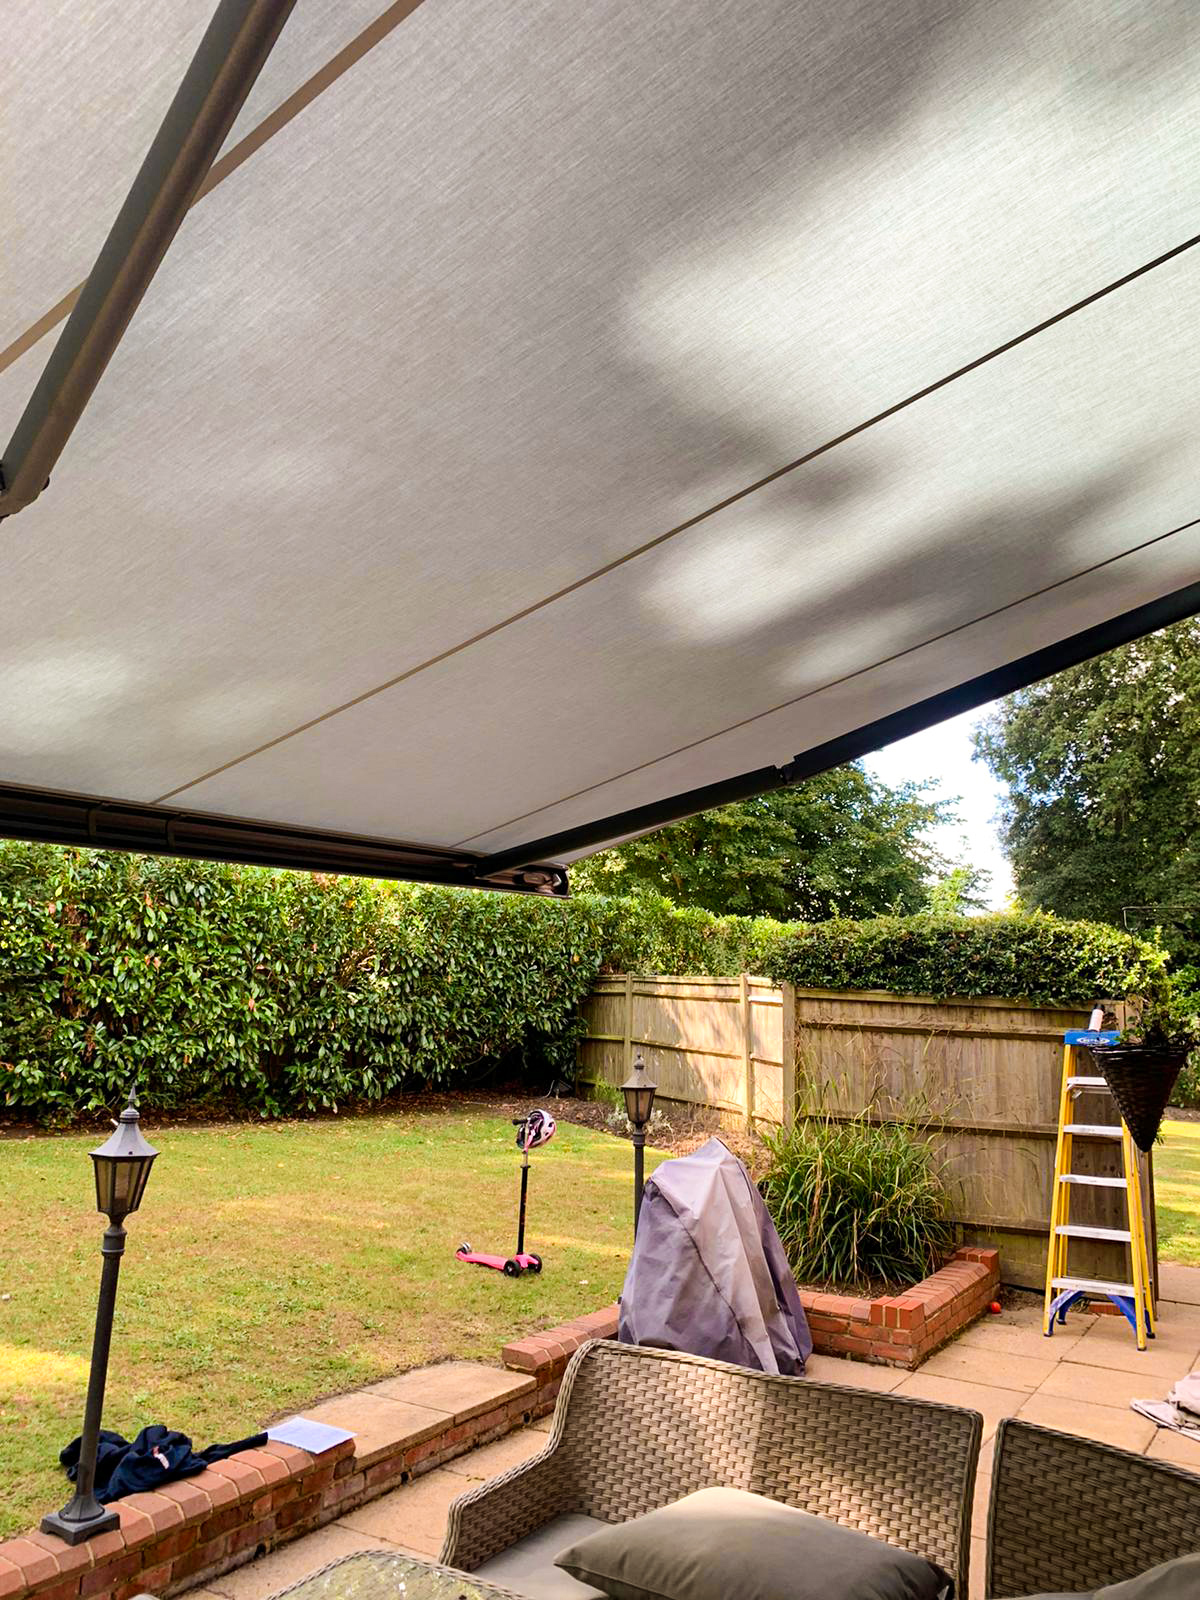 Markilux 6000 Awning Finished in Metallic Anthracite Grey